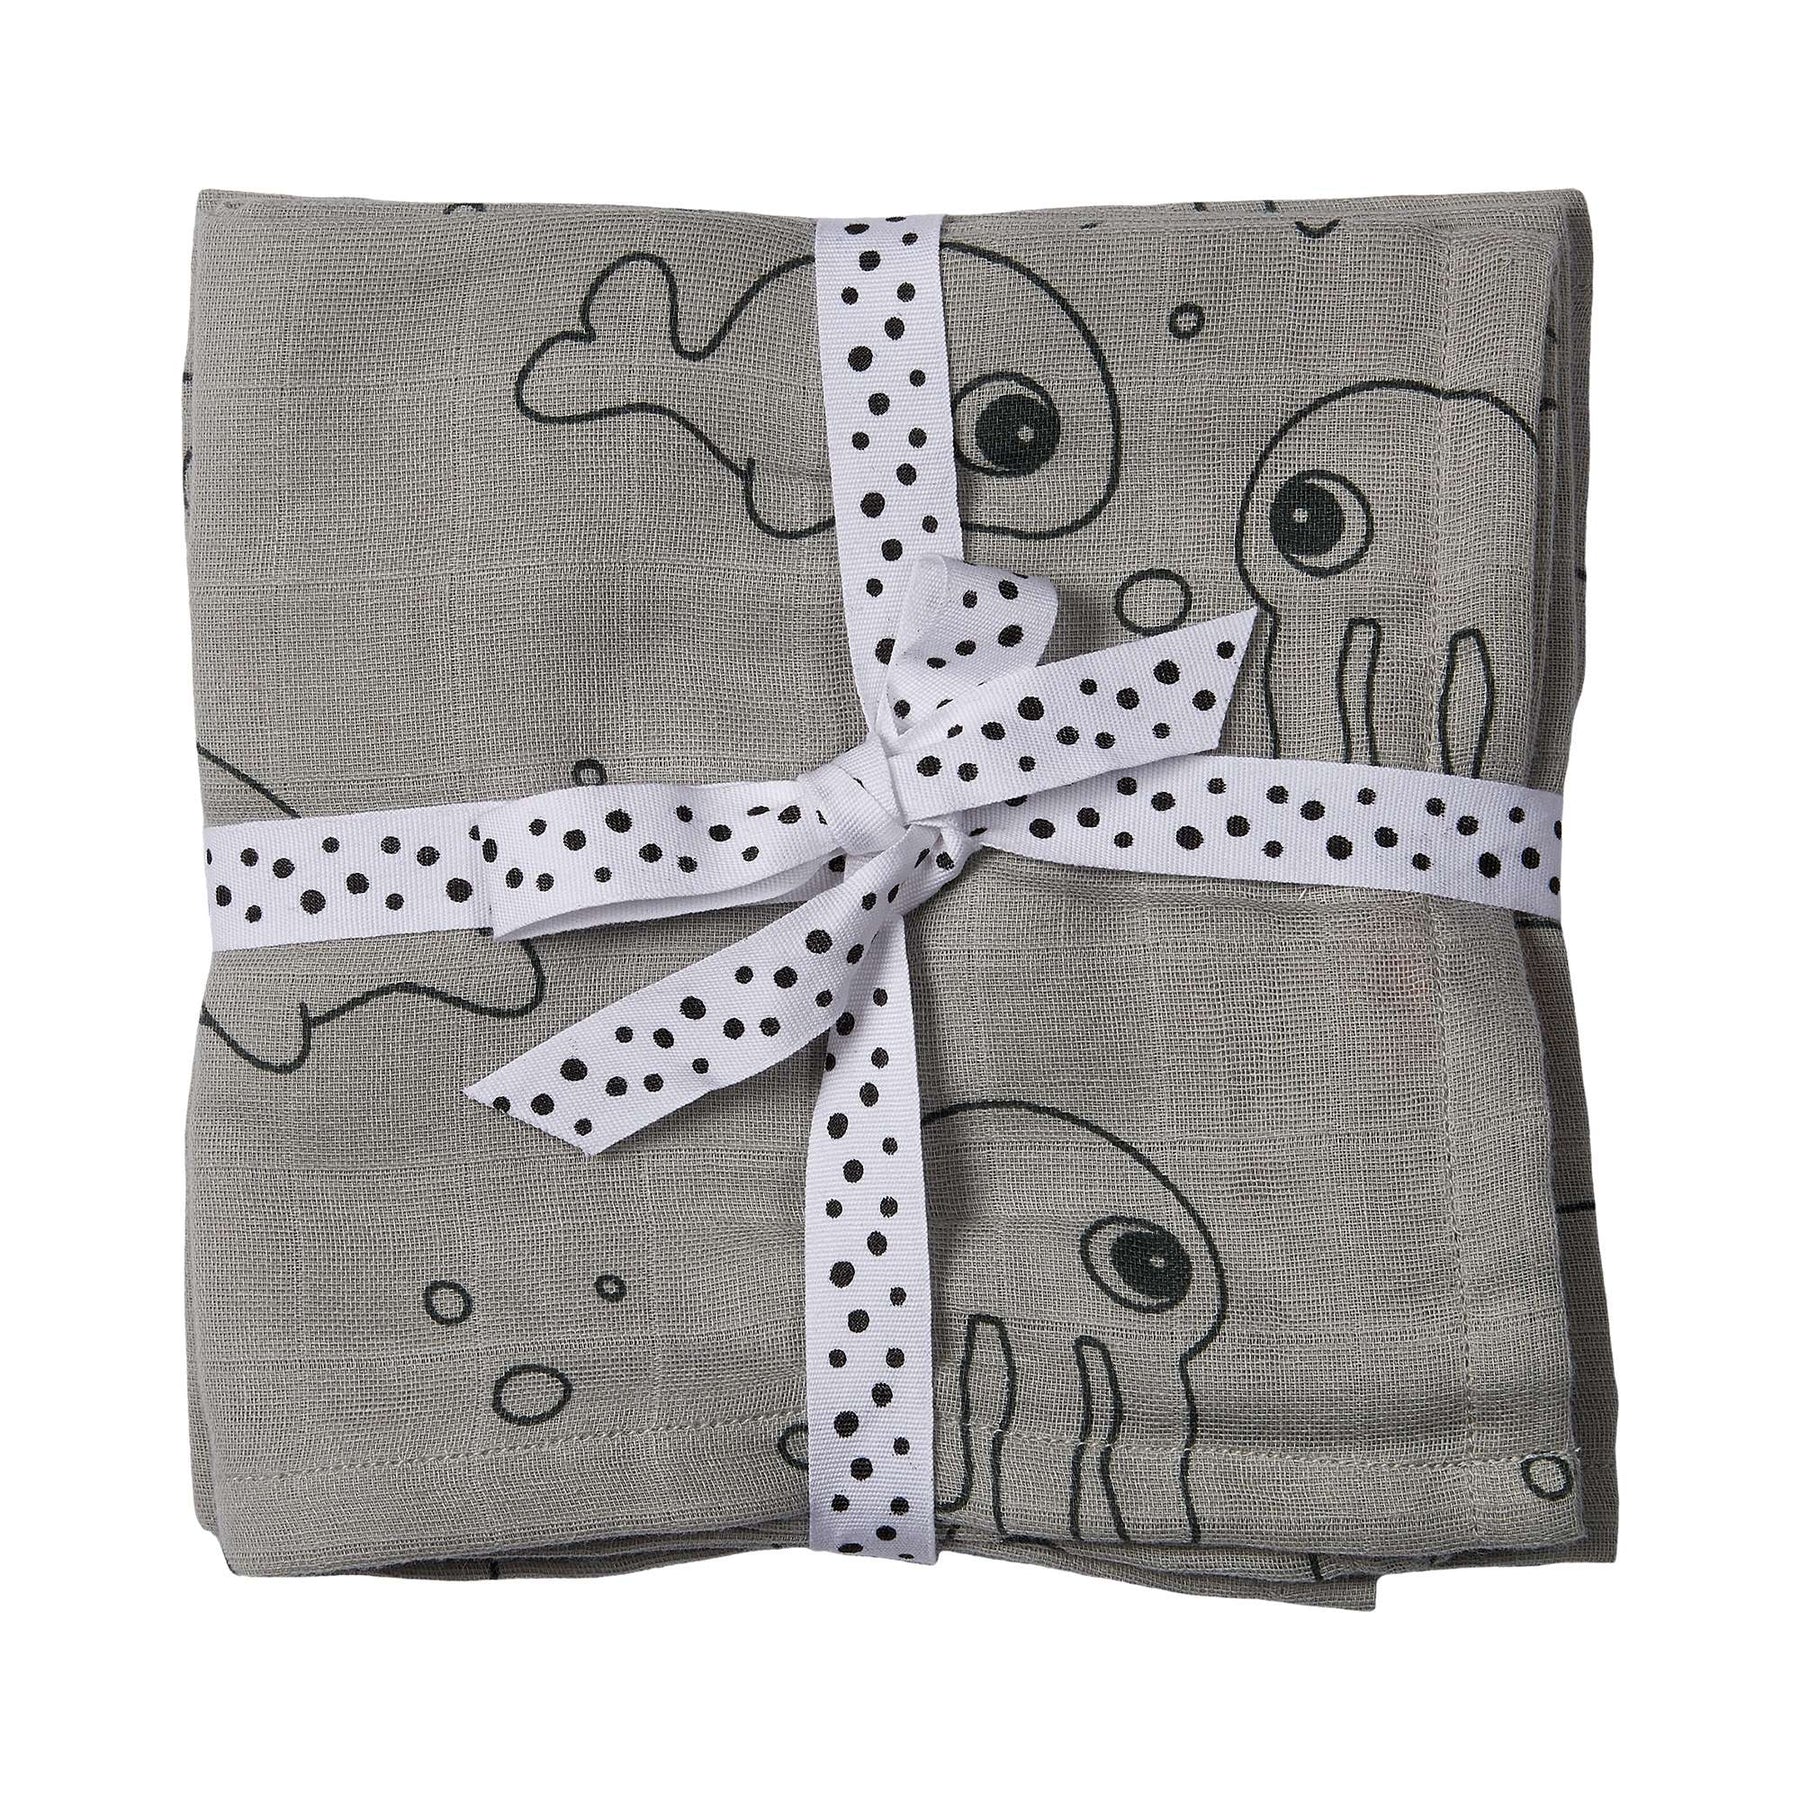 Burp cloth 2-pack - Sea friends - Grey - Front